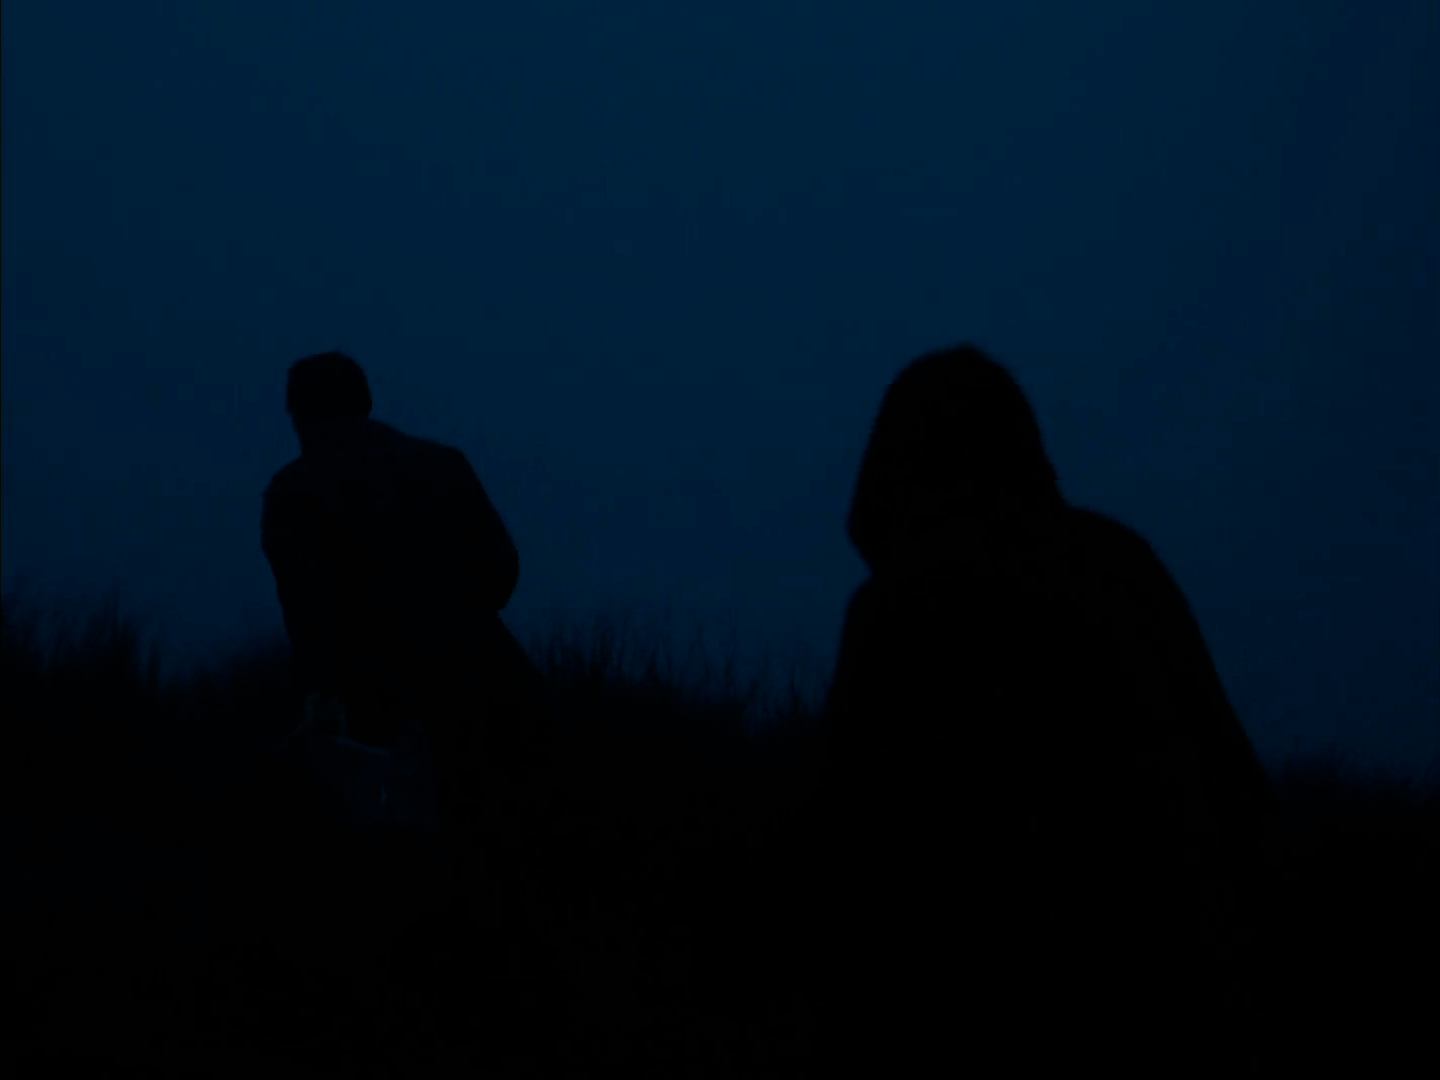 Wuthering.Heights.2011.LIMITED.1080p.Bluray.x264.anoXmous-2.jpeg